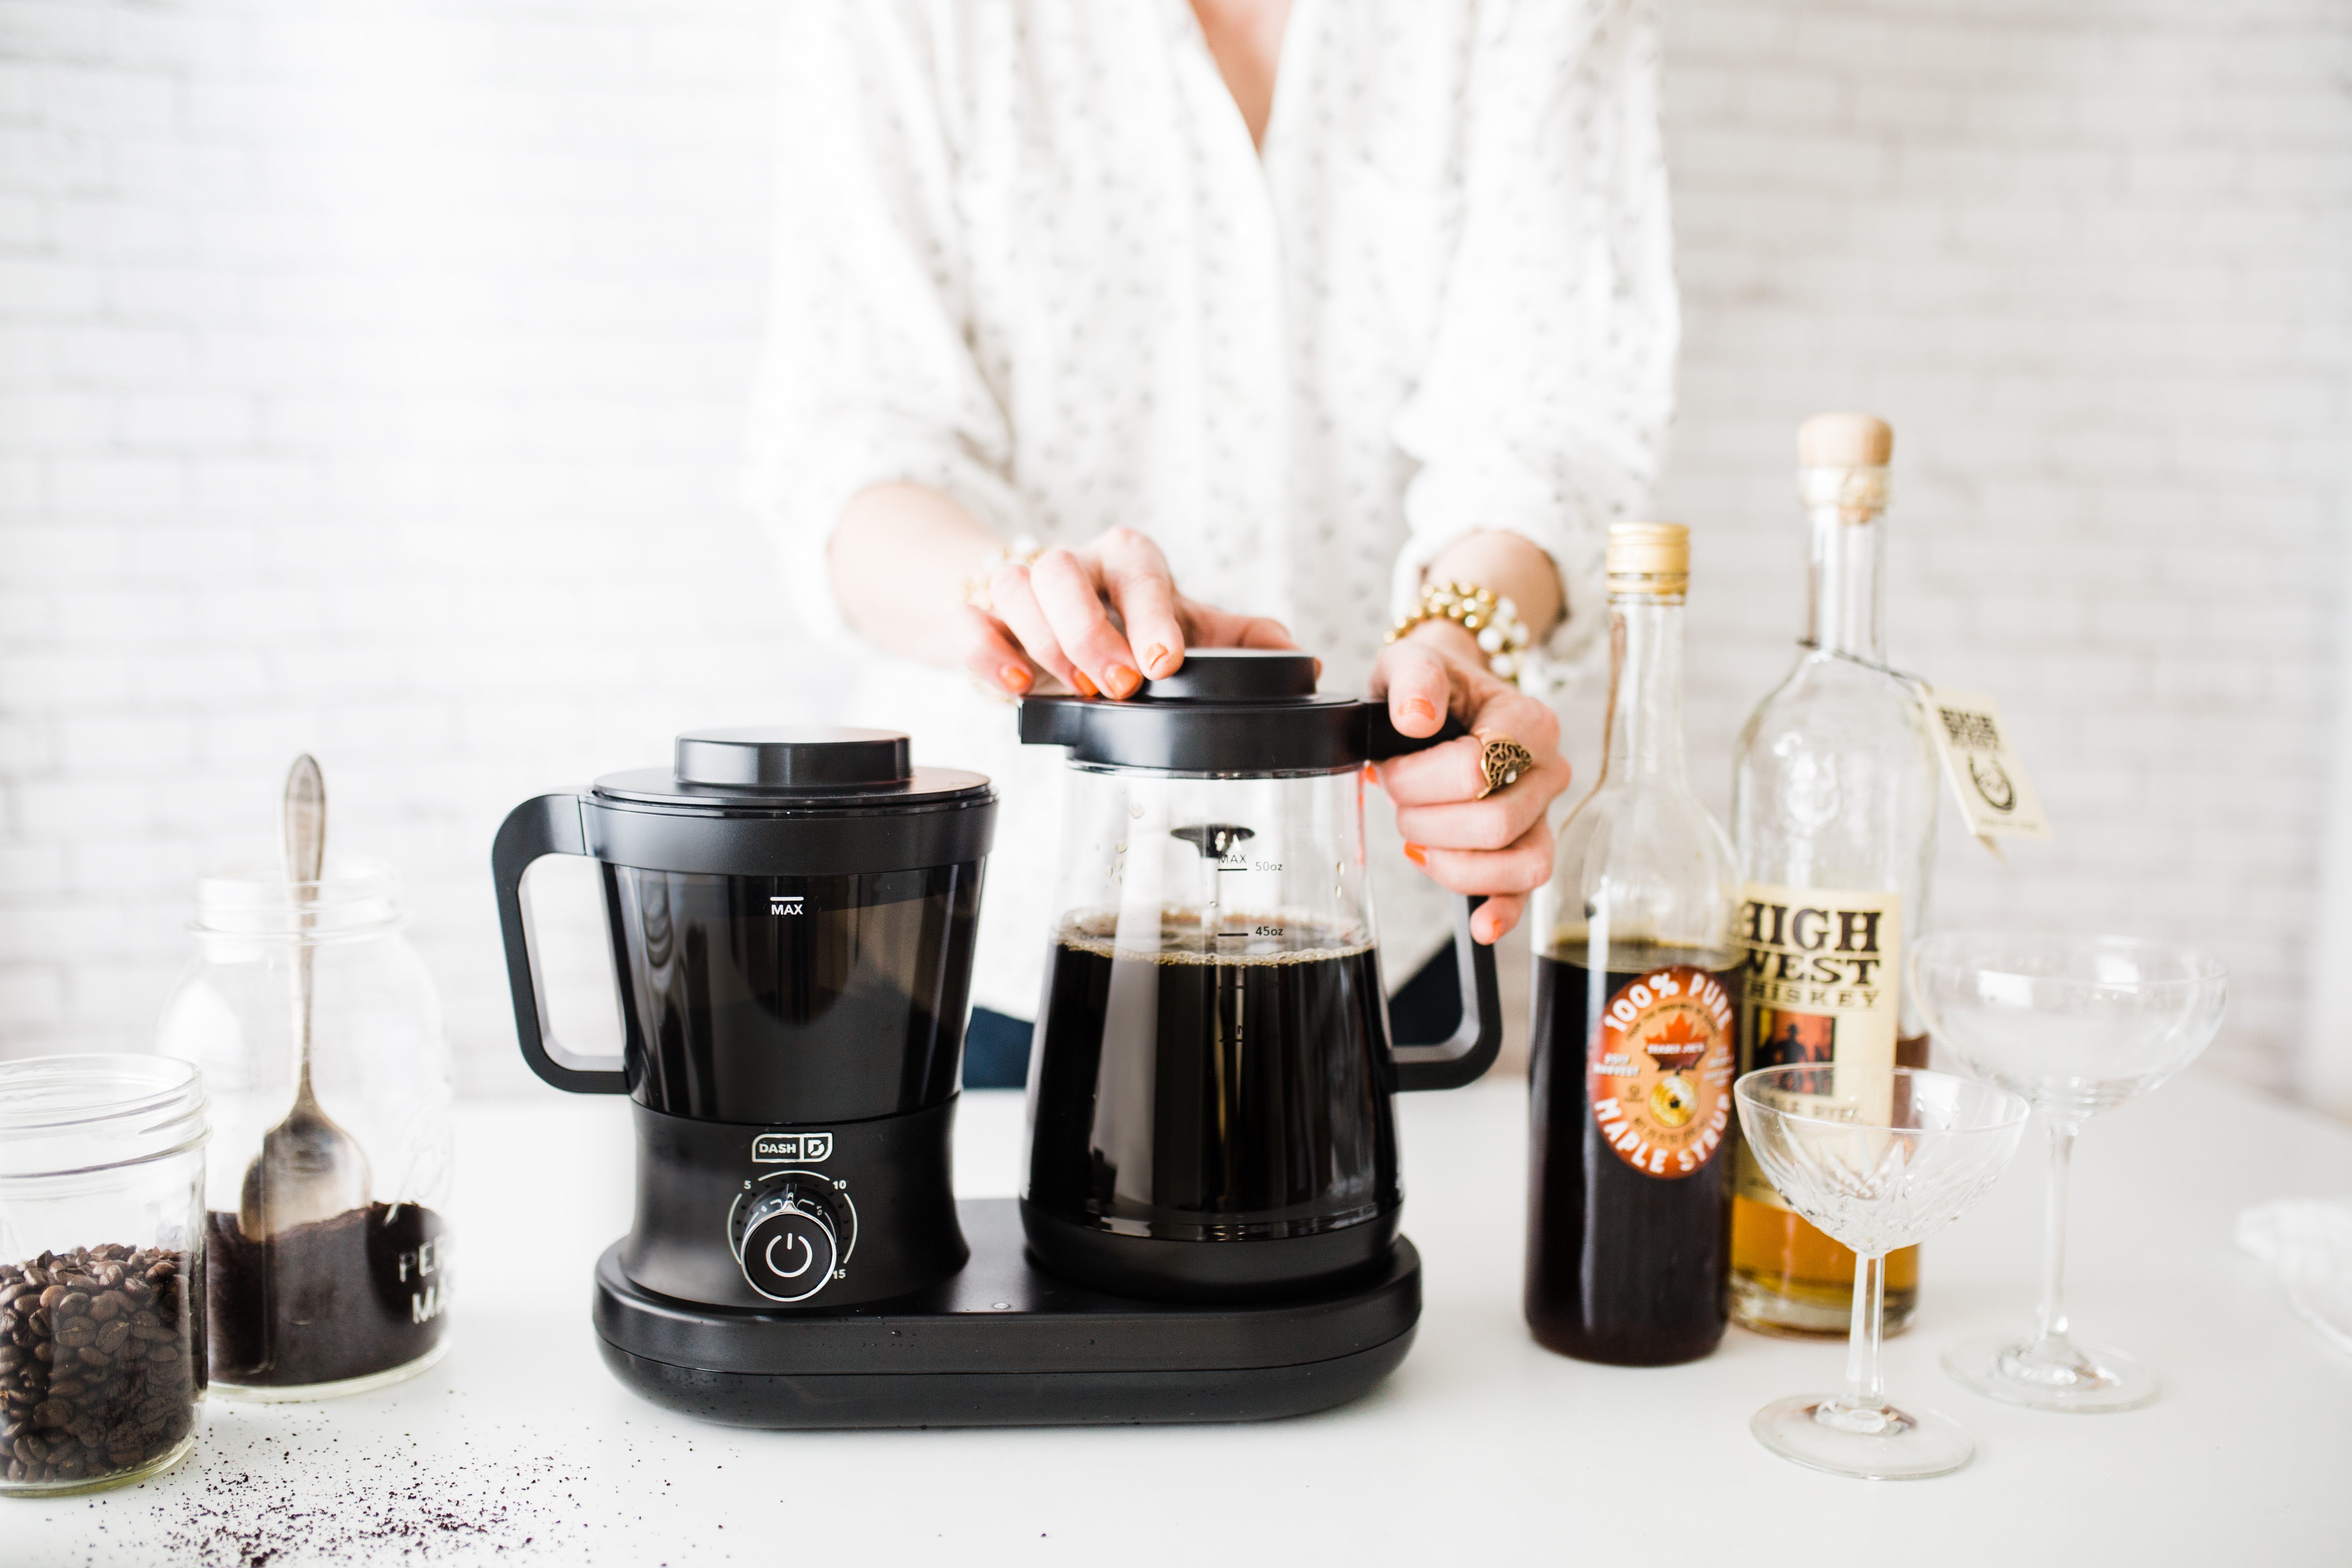 https://theinspiredhome.com/wp-content/uploads/2023/02/2018-02-IHA-COFFEE-Cold-Brew-1-resize.jpg